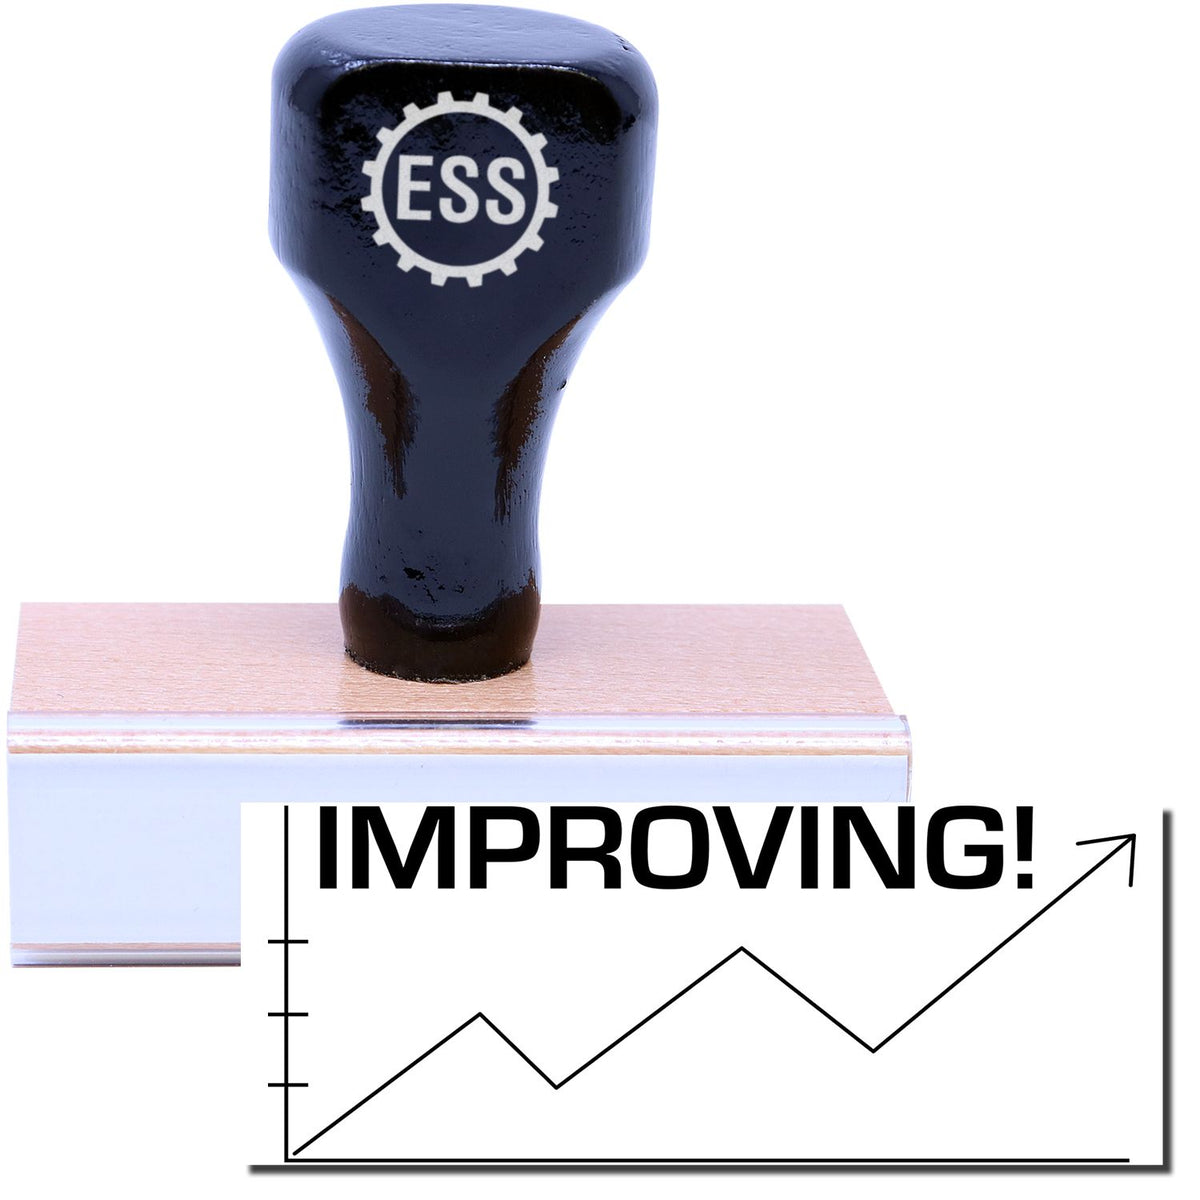 A stock office rubber stamp with a stamped image showing how the text &quot;IMPROVING!&quot; in a large font with an image of a chart below that shows an arrow moving up, down, and back up again is displayed after stamping.